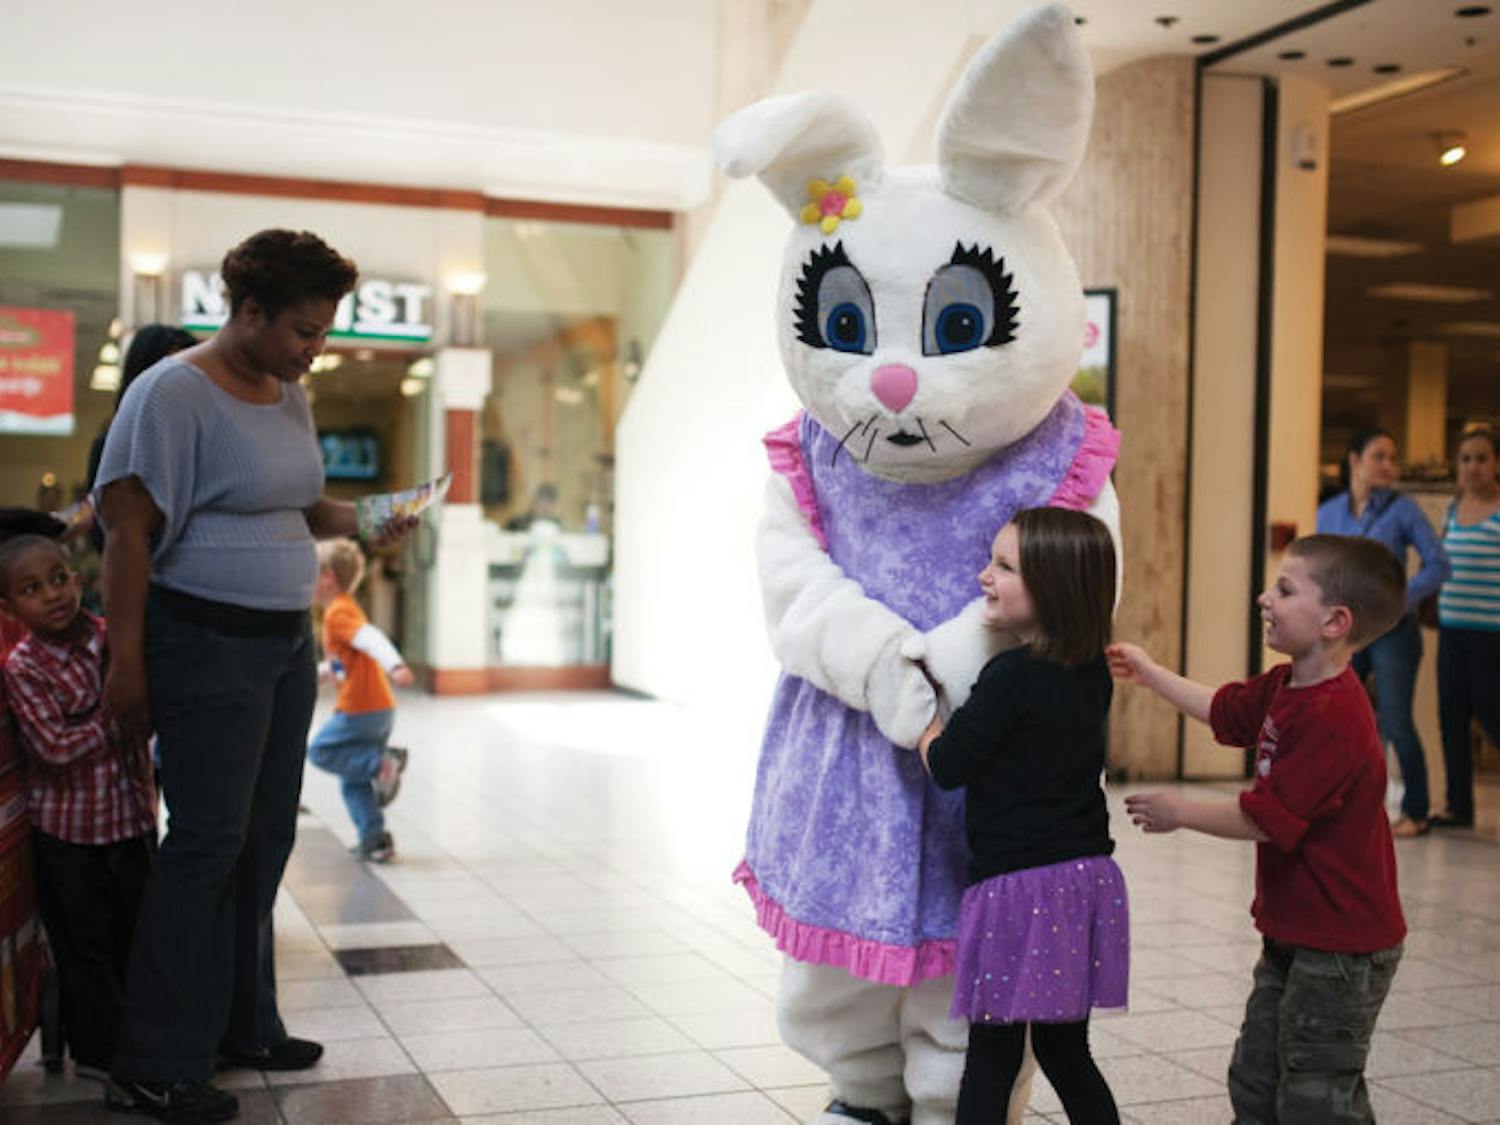 Children clamor for the Easter Bunny at the Oaks Mall on Thursday. In celebration of the holiday, WorldWide Photography is providing the opportunity for children to take pictures with the Easter Bunny until Saturday.